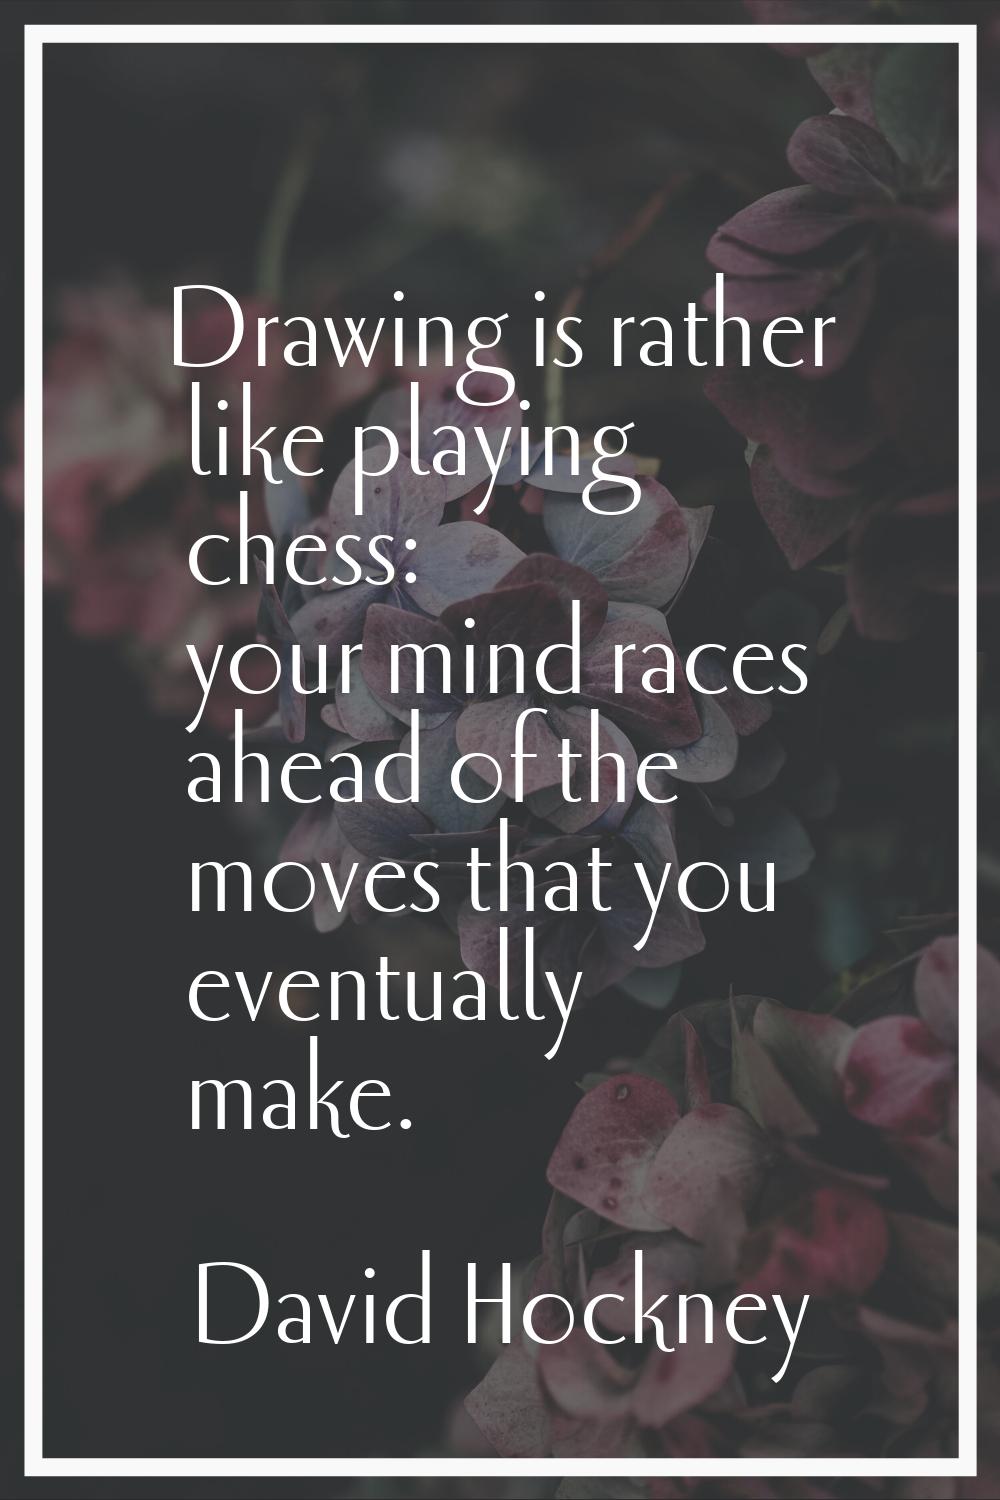 Drawing is rather like playing chess: your mind races ahead of the moves that you eventually make.